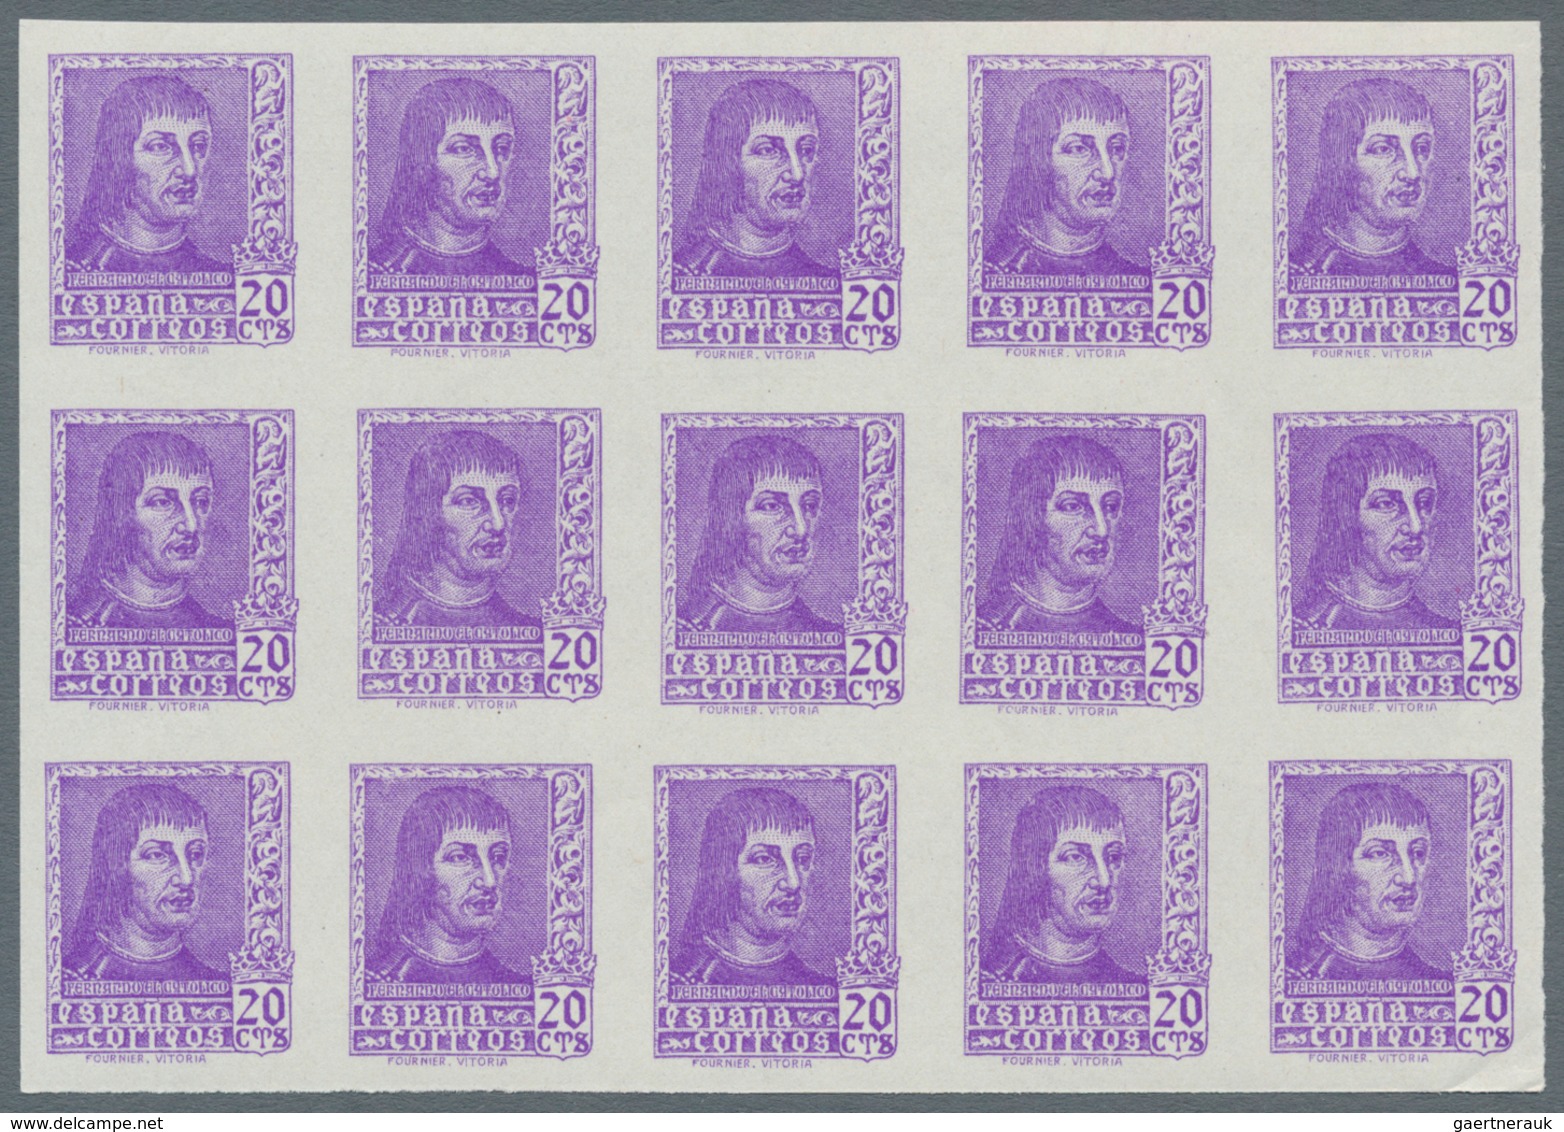 Spanien: 1938, Ferdinand II. five different stamps incl. both imprints of 30c. in IMPERFORATED block